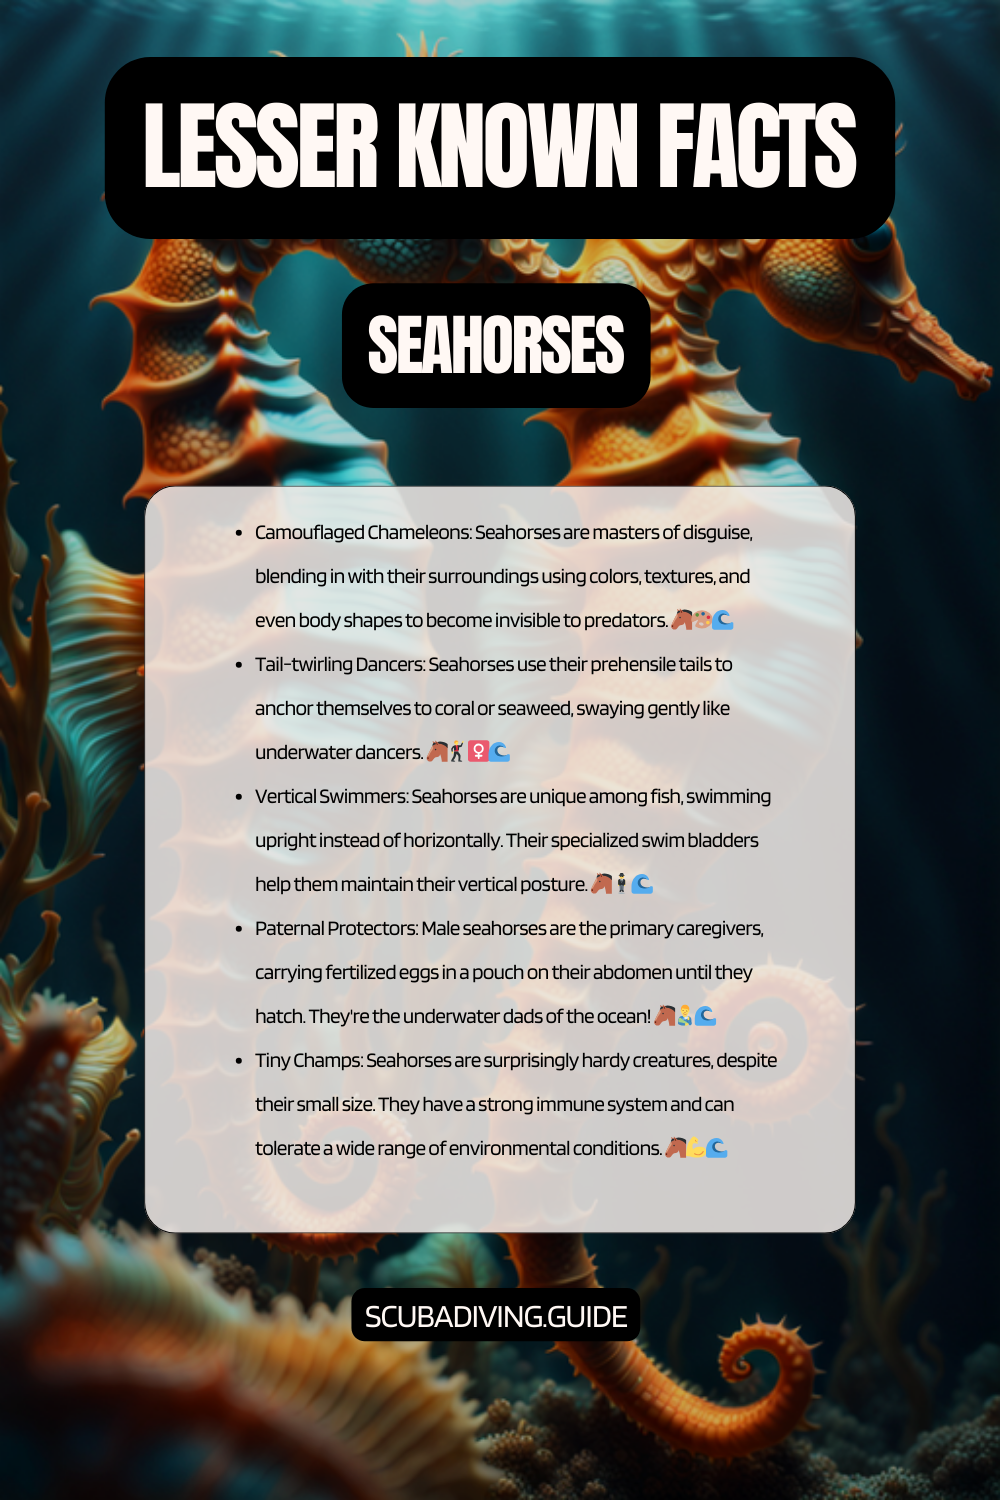 lesser known facts Seahorses